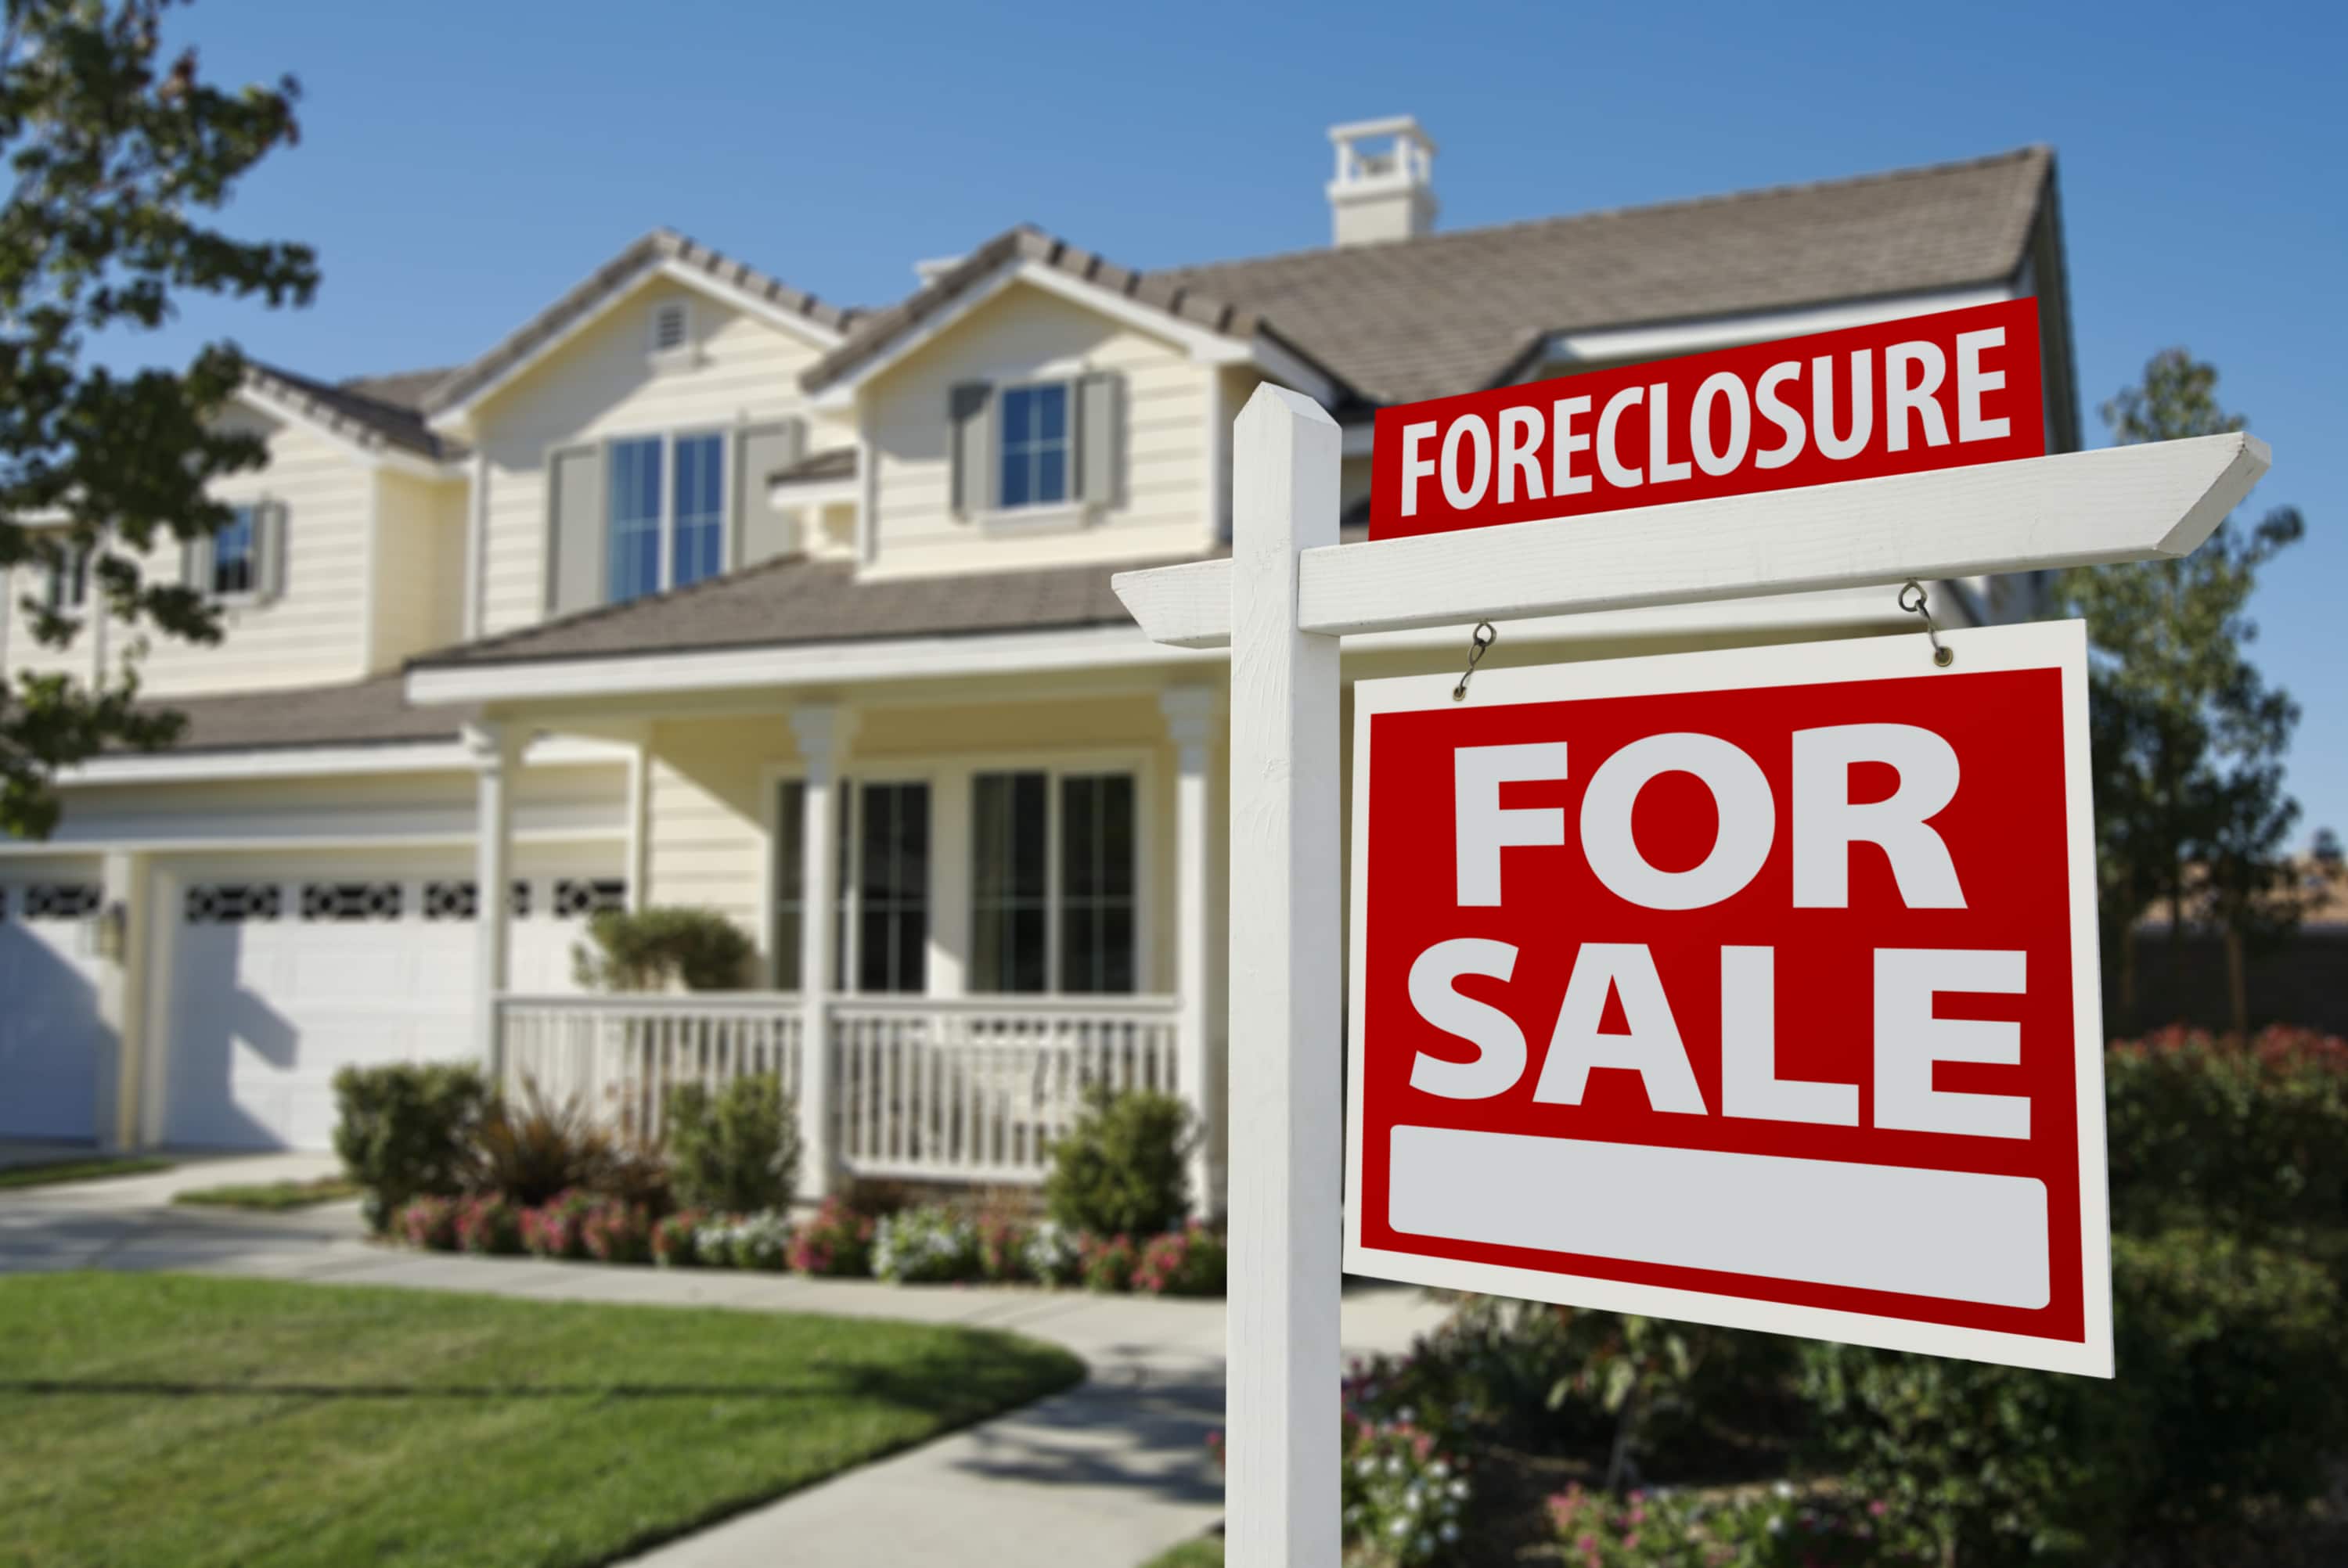 buying-foreclosure-home-property-bank-questions.jpg